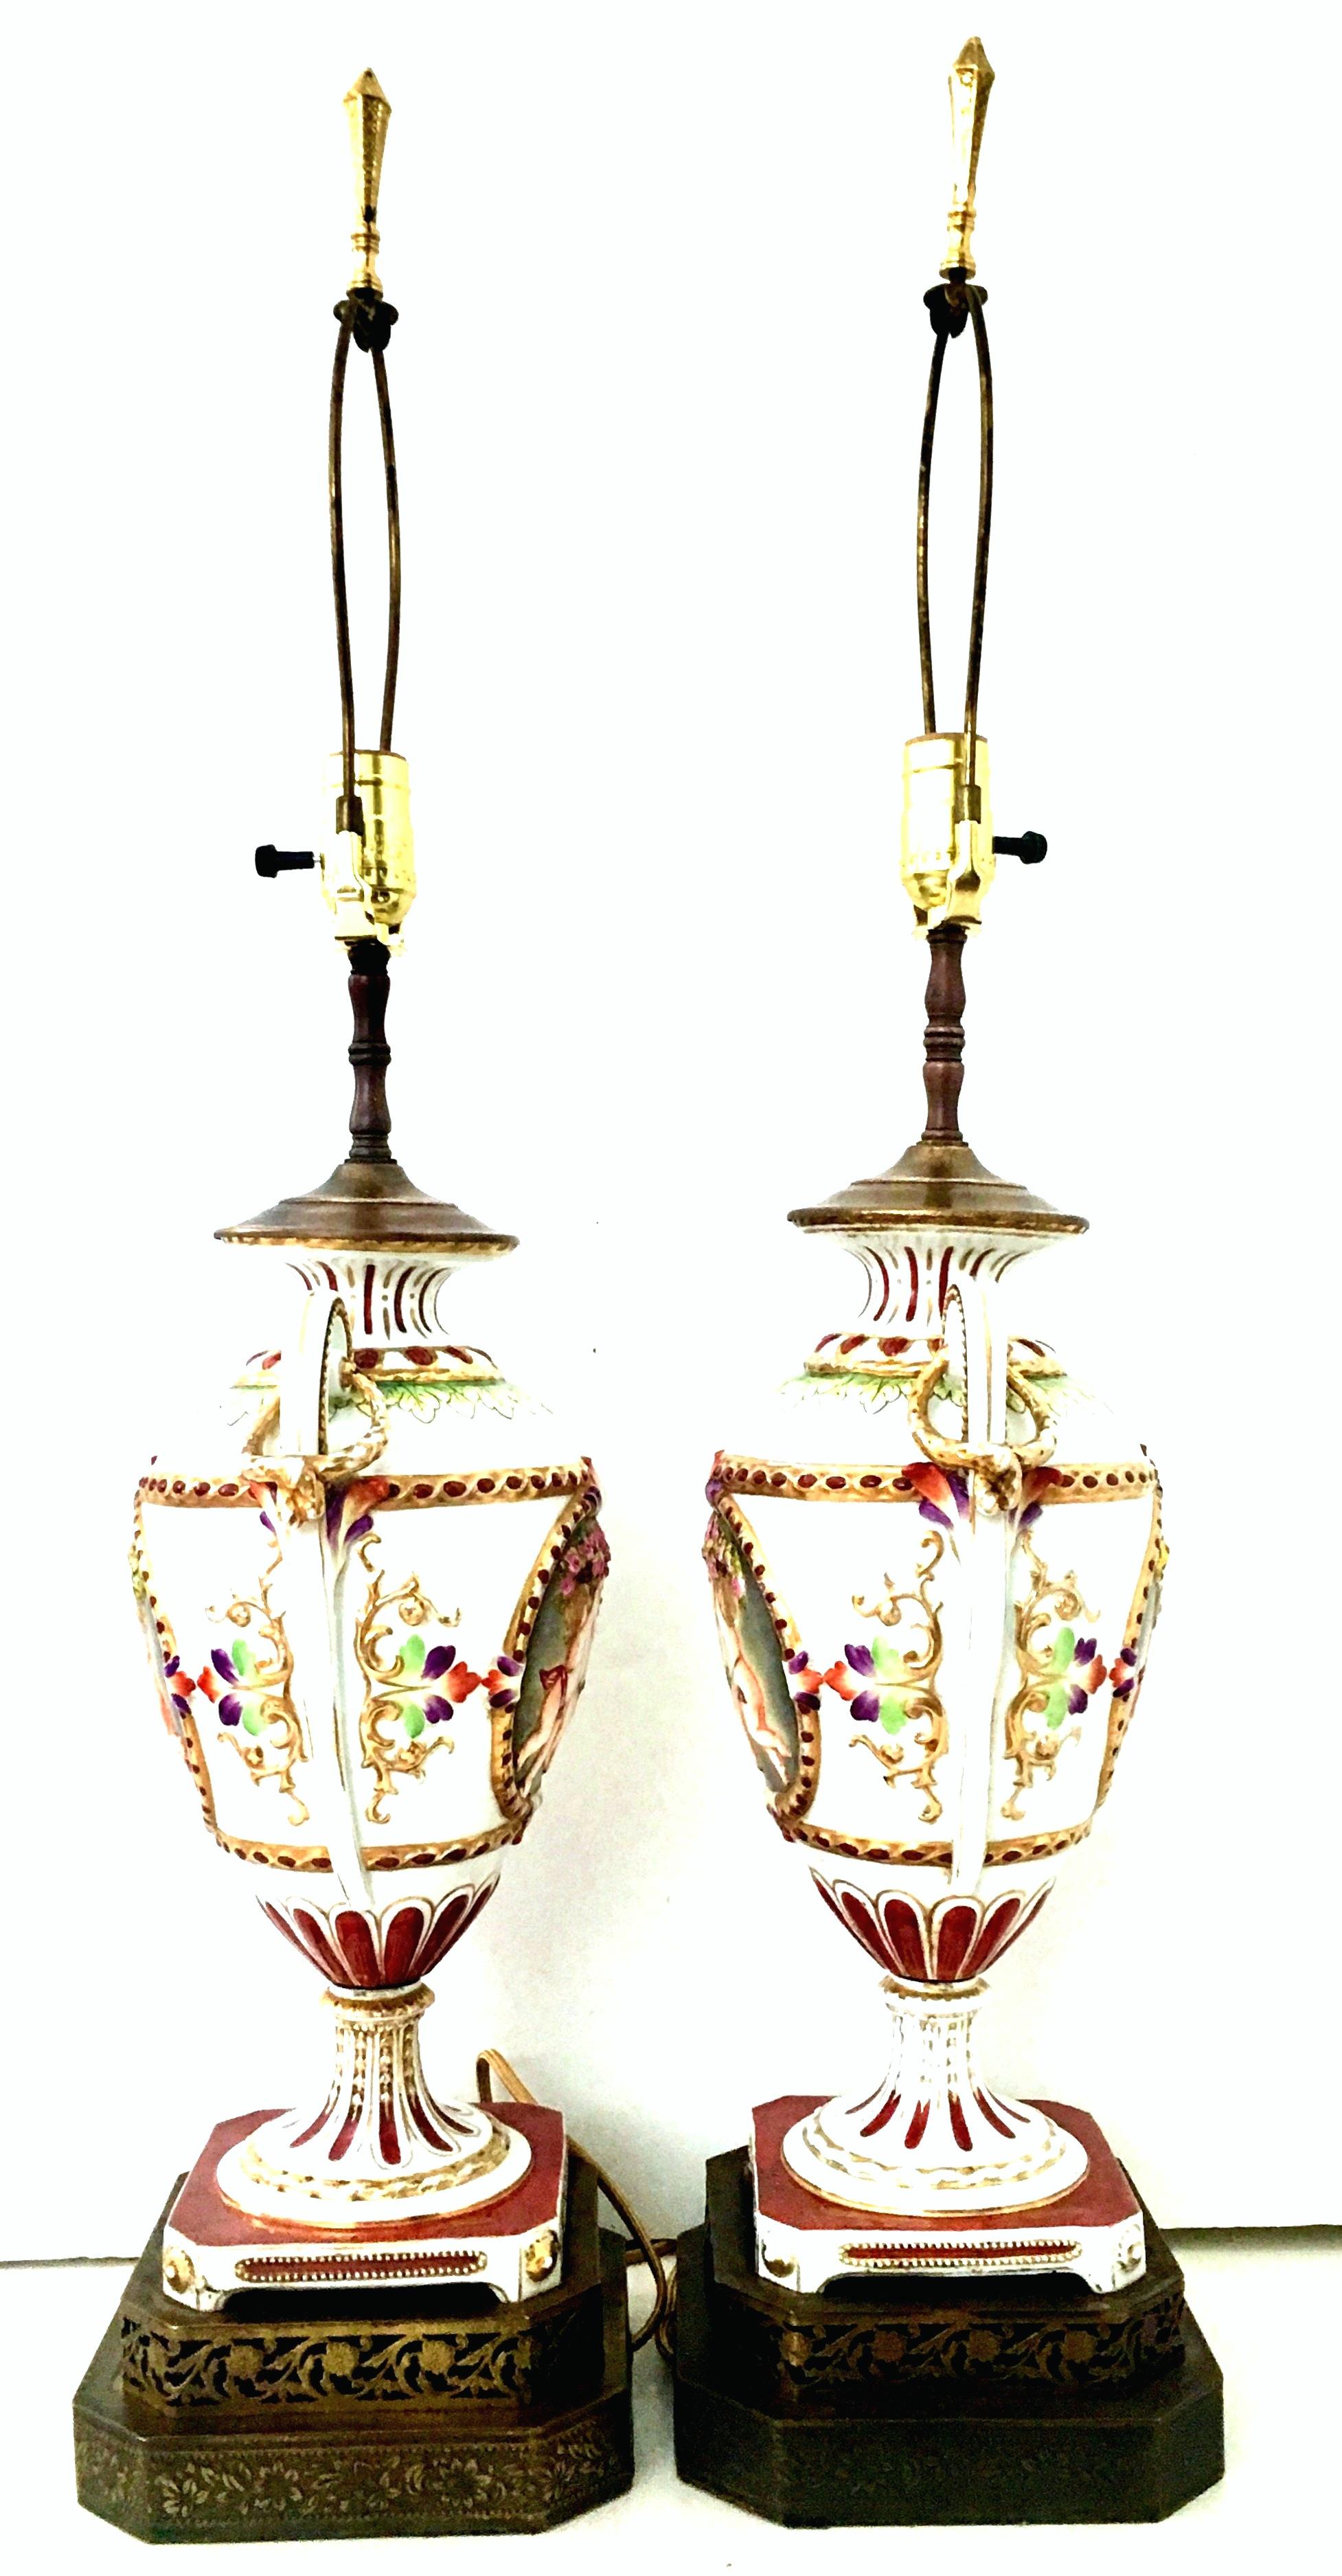 Antique 19th century German Royal Vienna style porcelain hand painted handled urn vase form portrait cherub motif lamps. Incredible pair of dimensional identical lamps feature a white ground with deep claret painted accents and 22-karat gold gilt